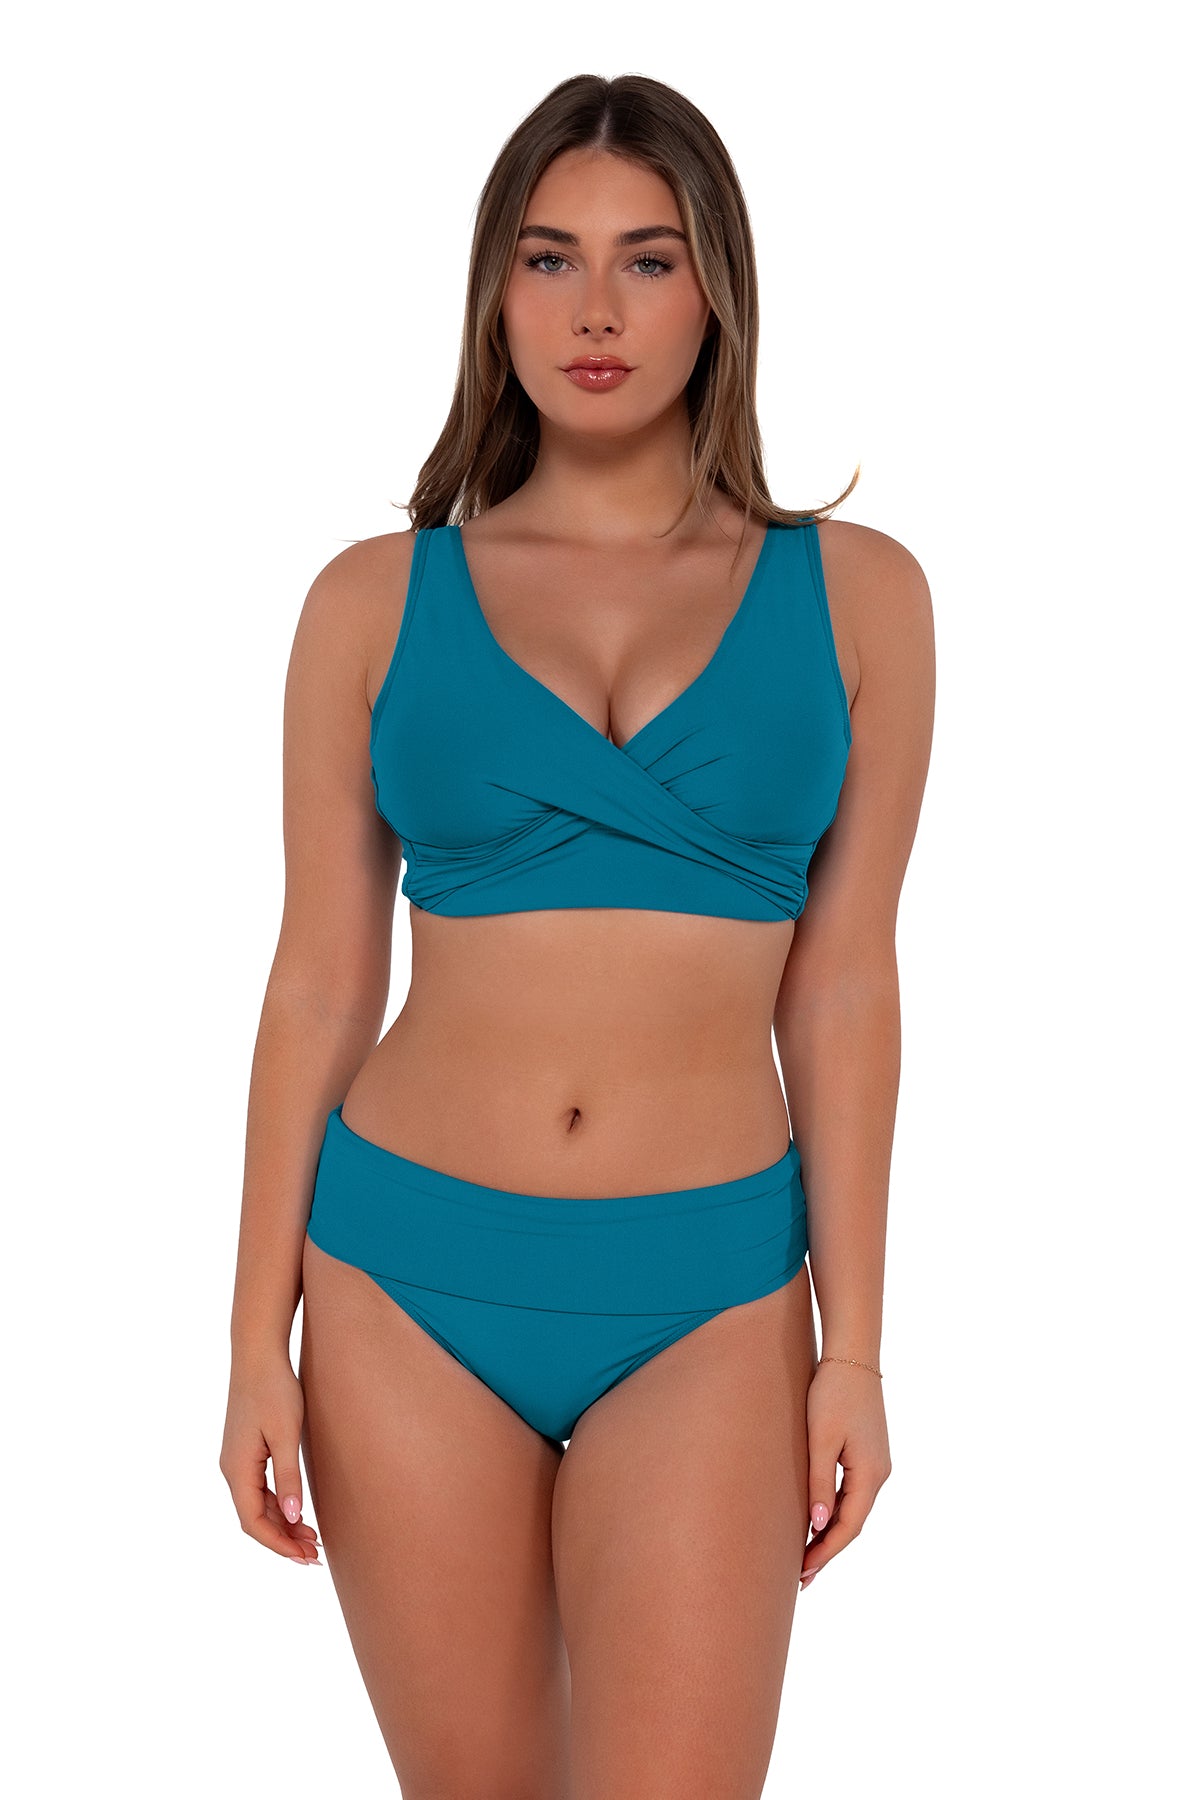 Front pose #2 of Taylor wearing Sunsets Avalon Teal Hannah High Waist Bottom showing folded waist paired with Elsie Top bikini bralette